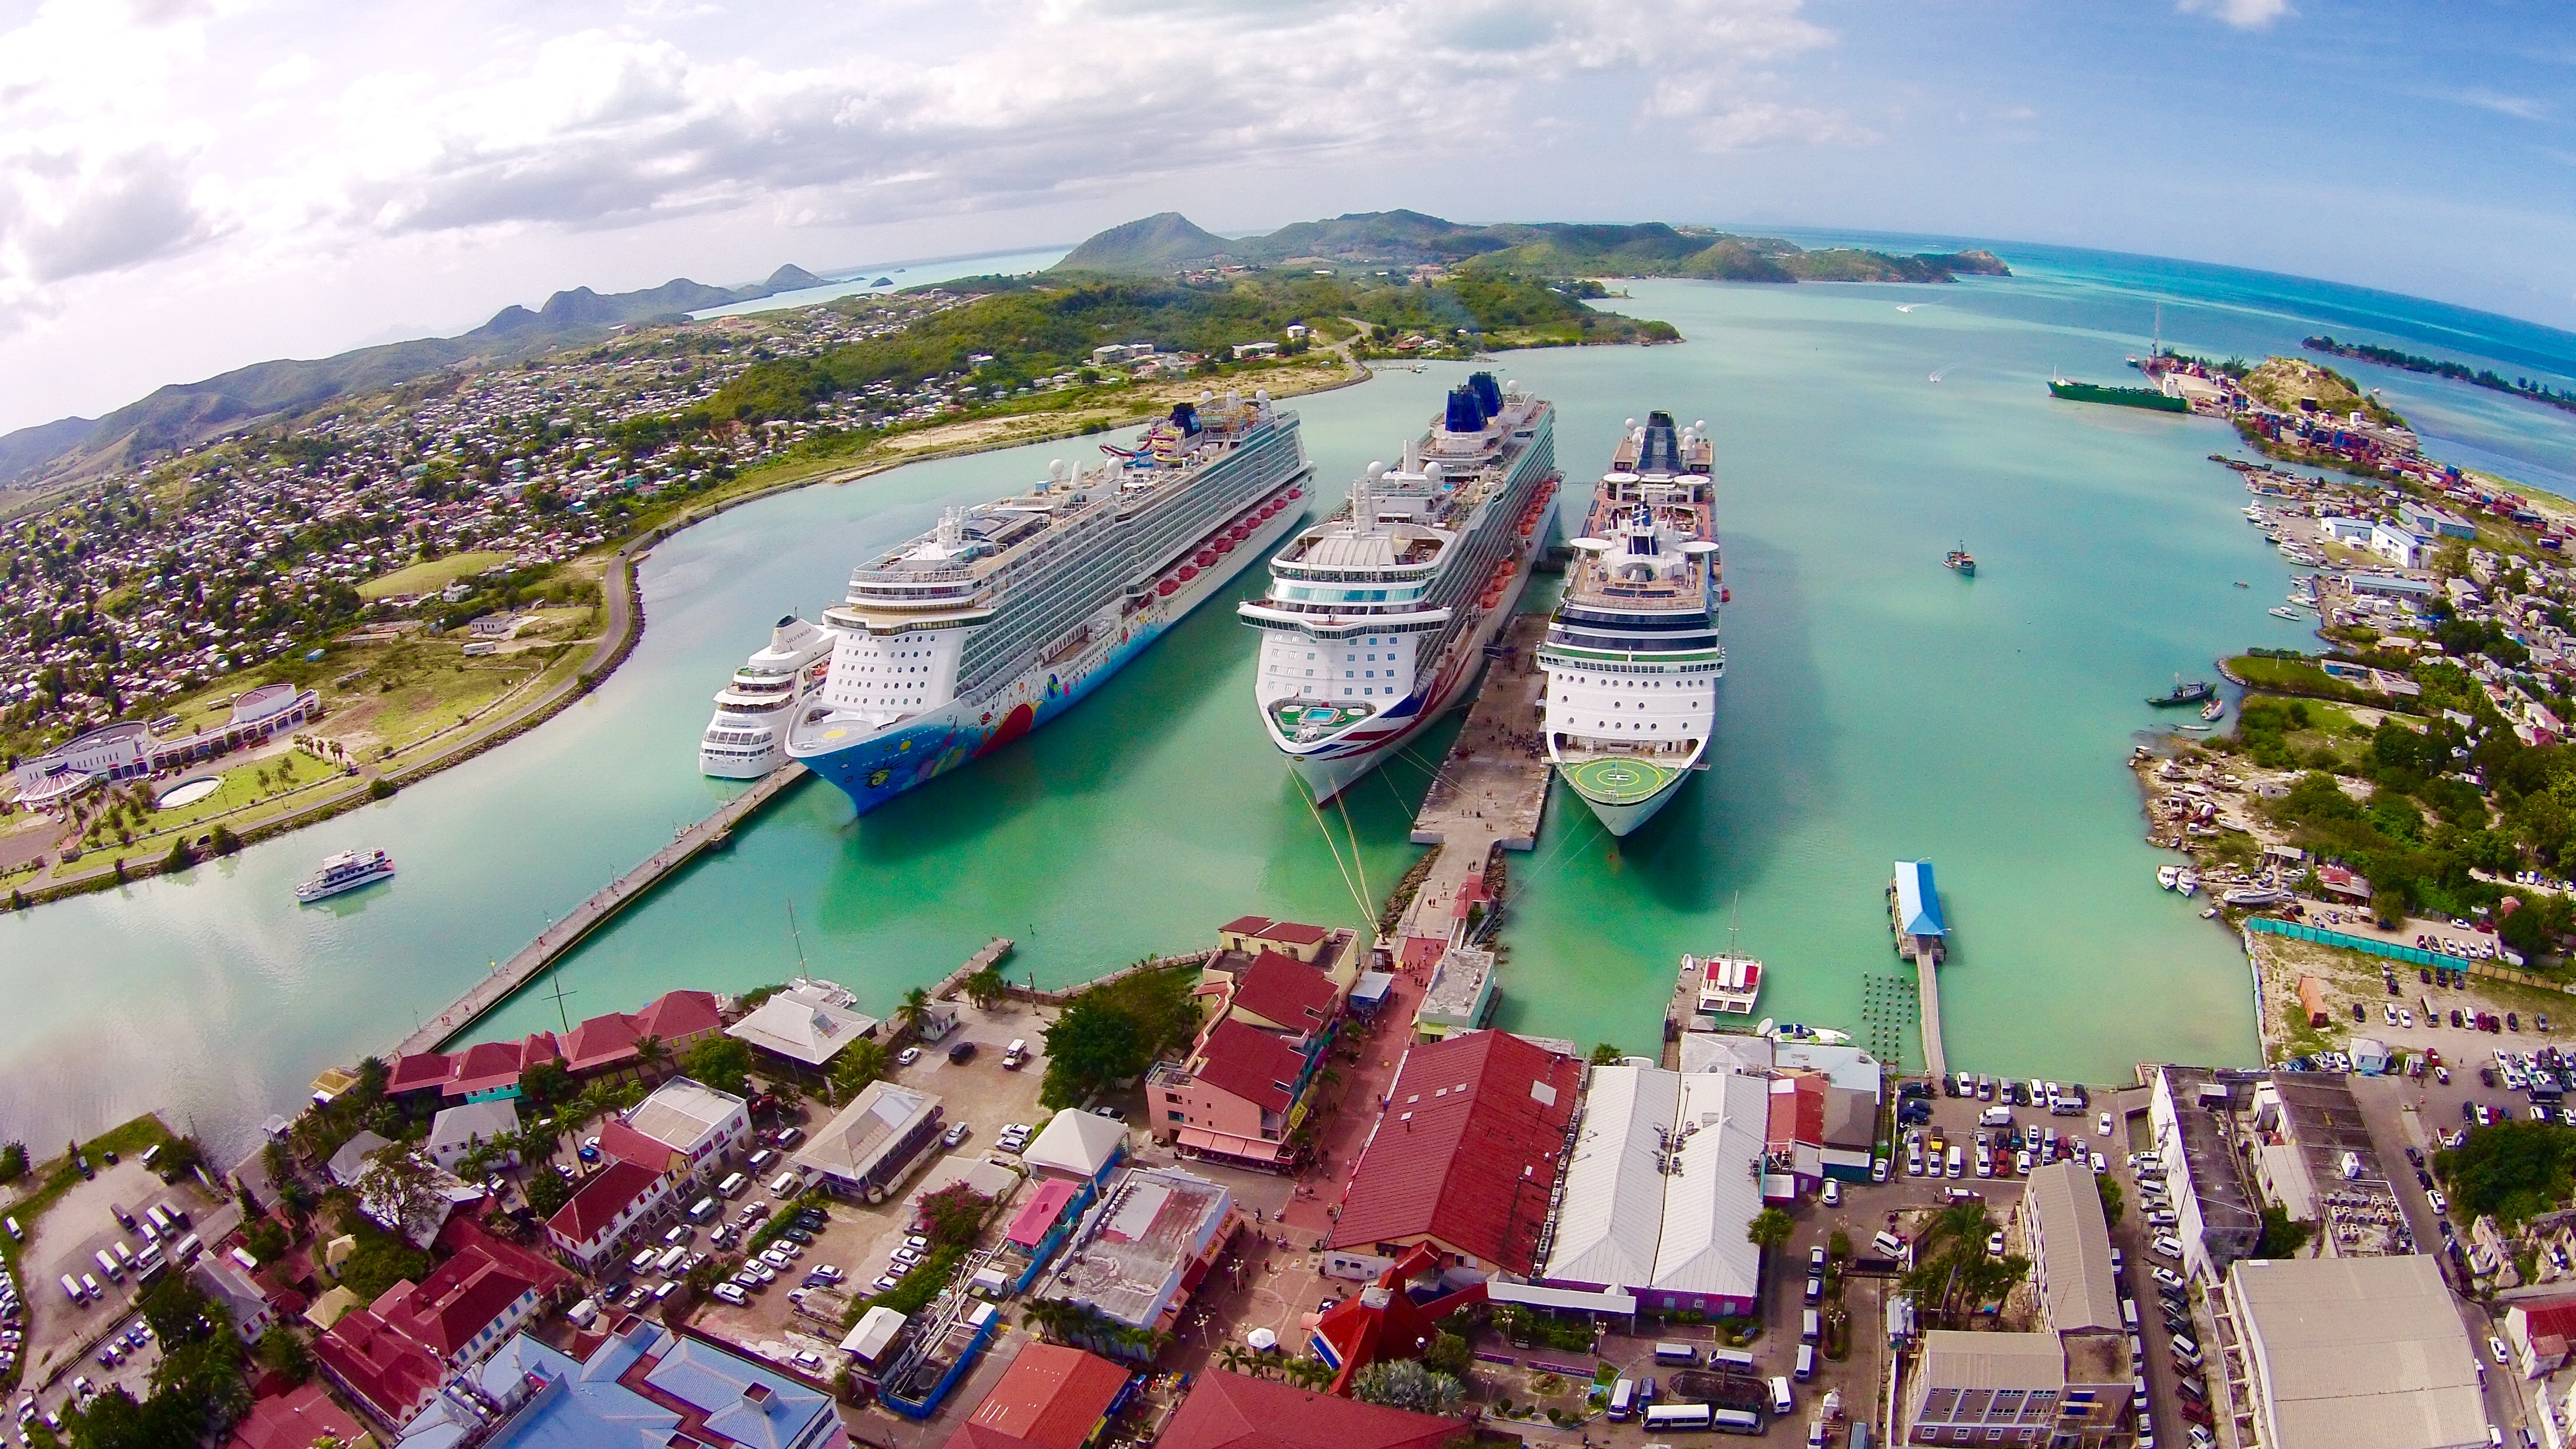 Carnival Cruise Lines pulls out of Antigua